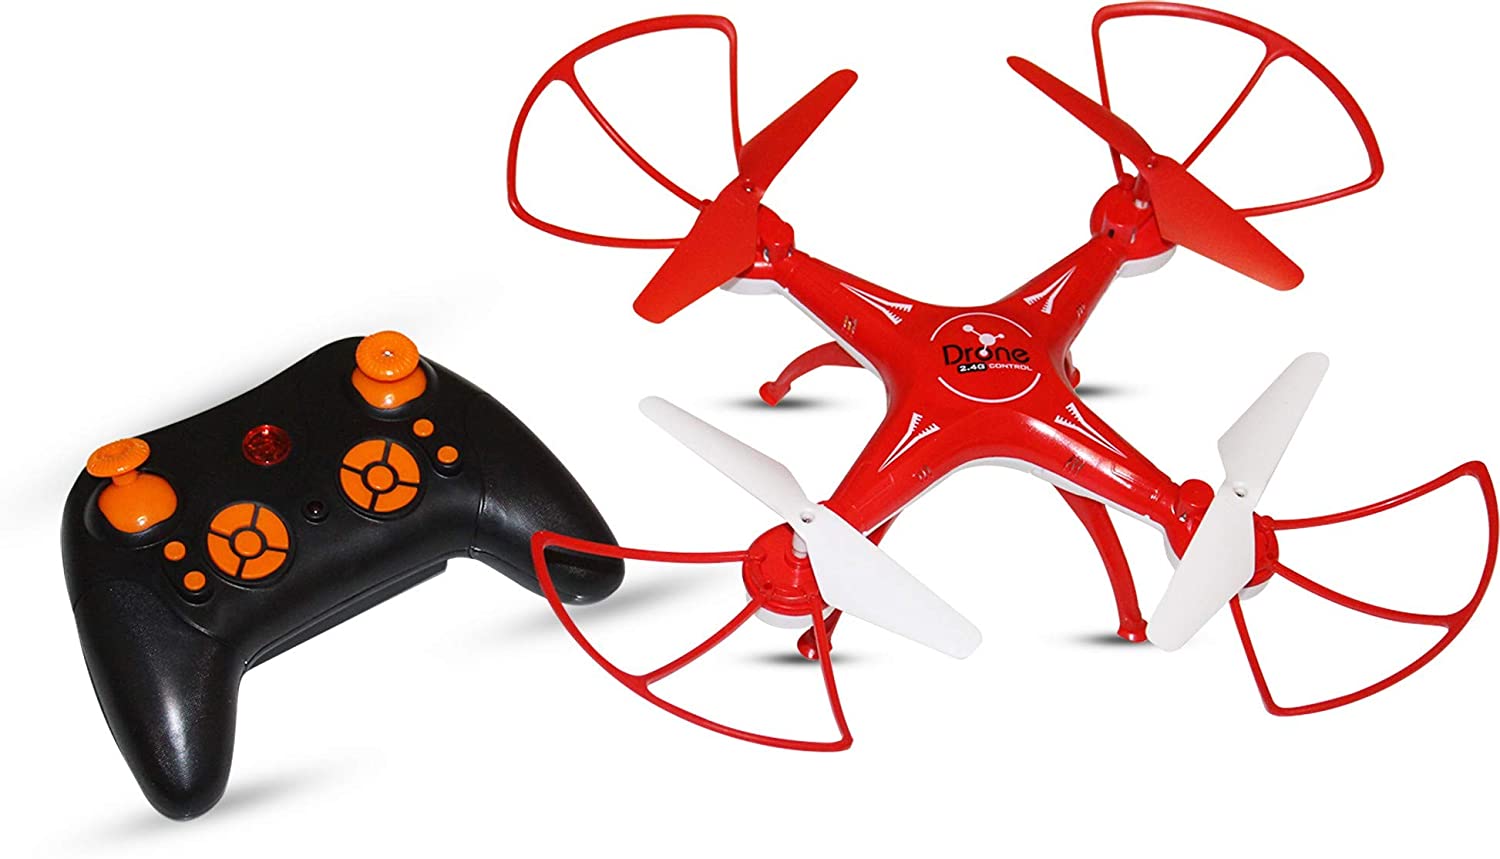 Toy Drone H 010